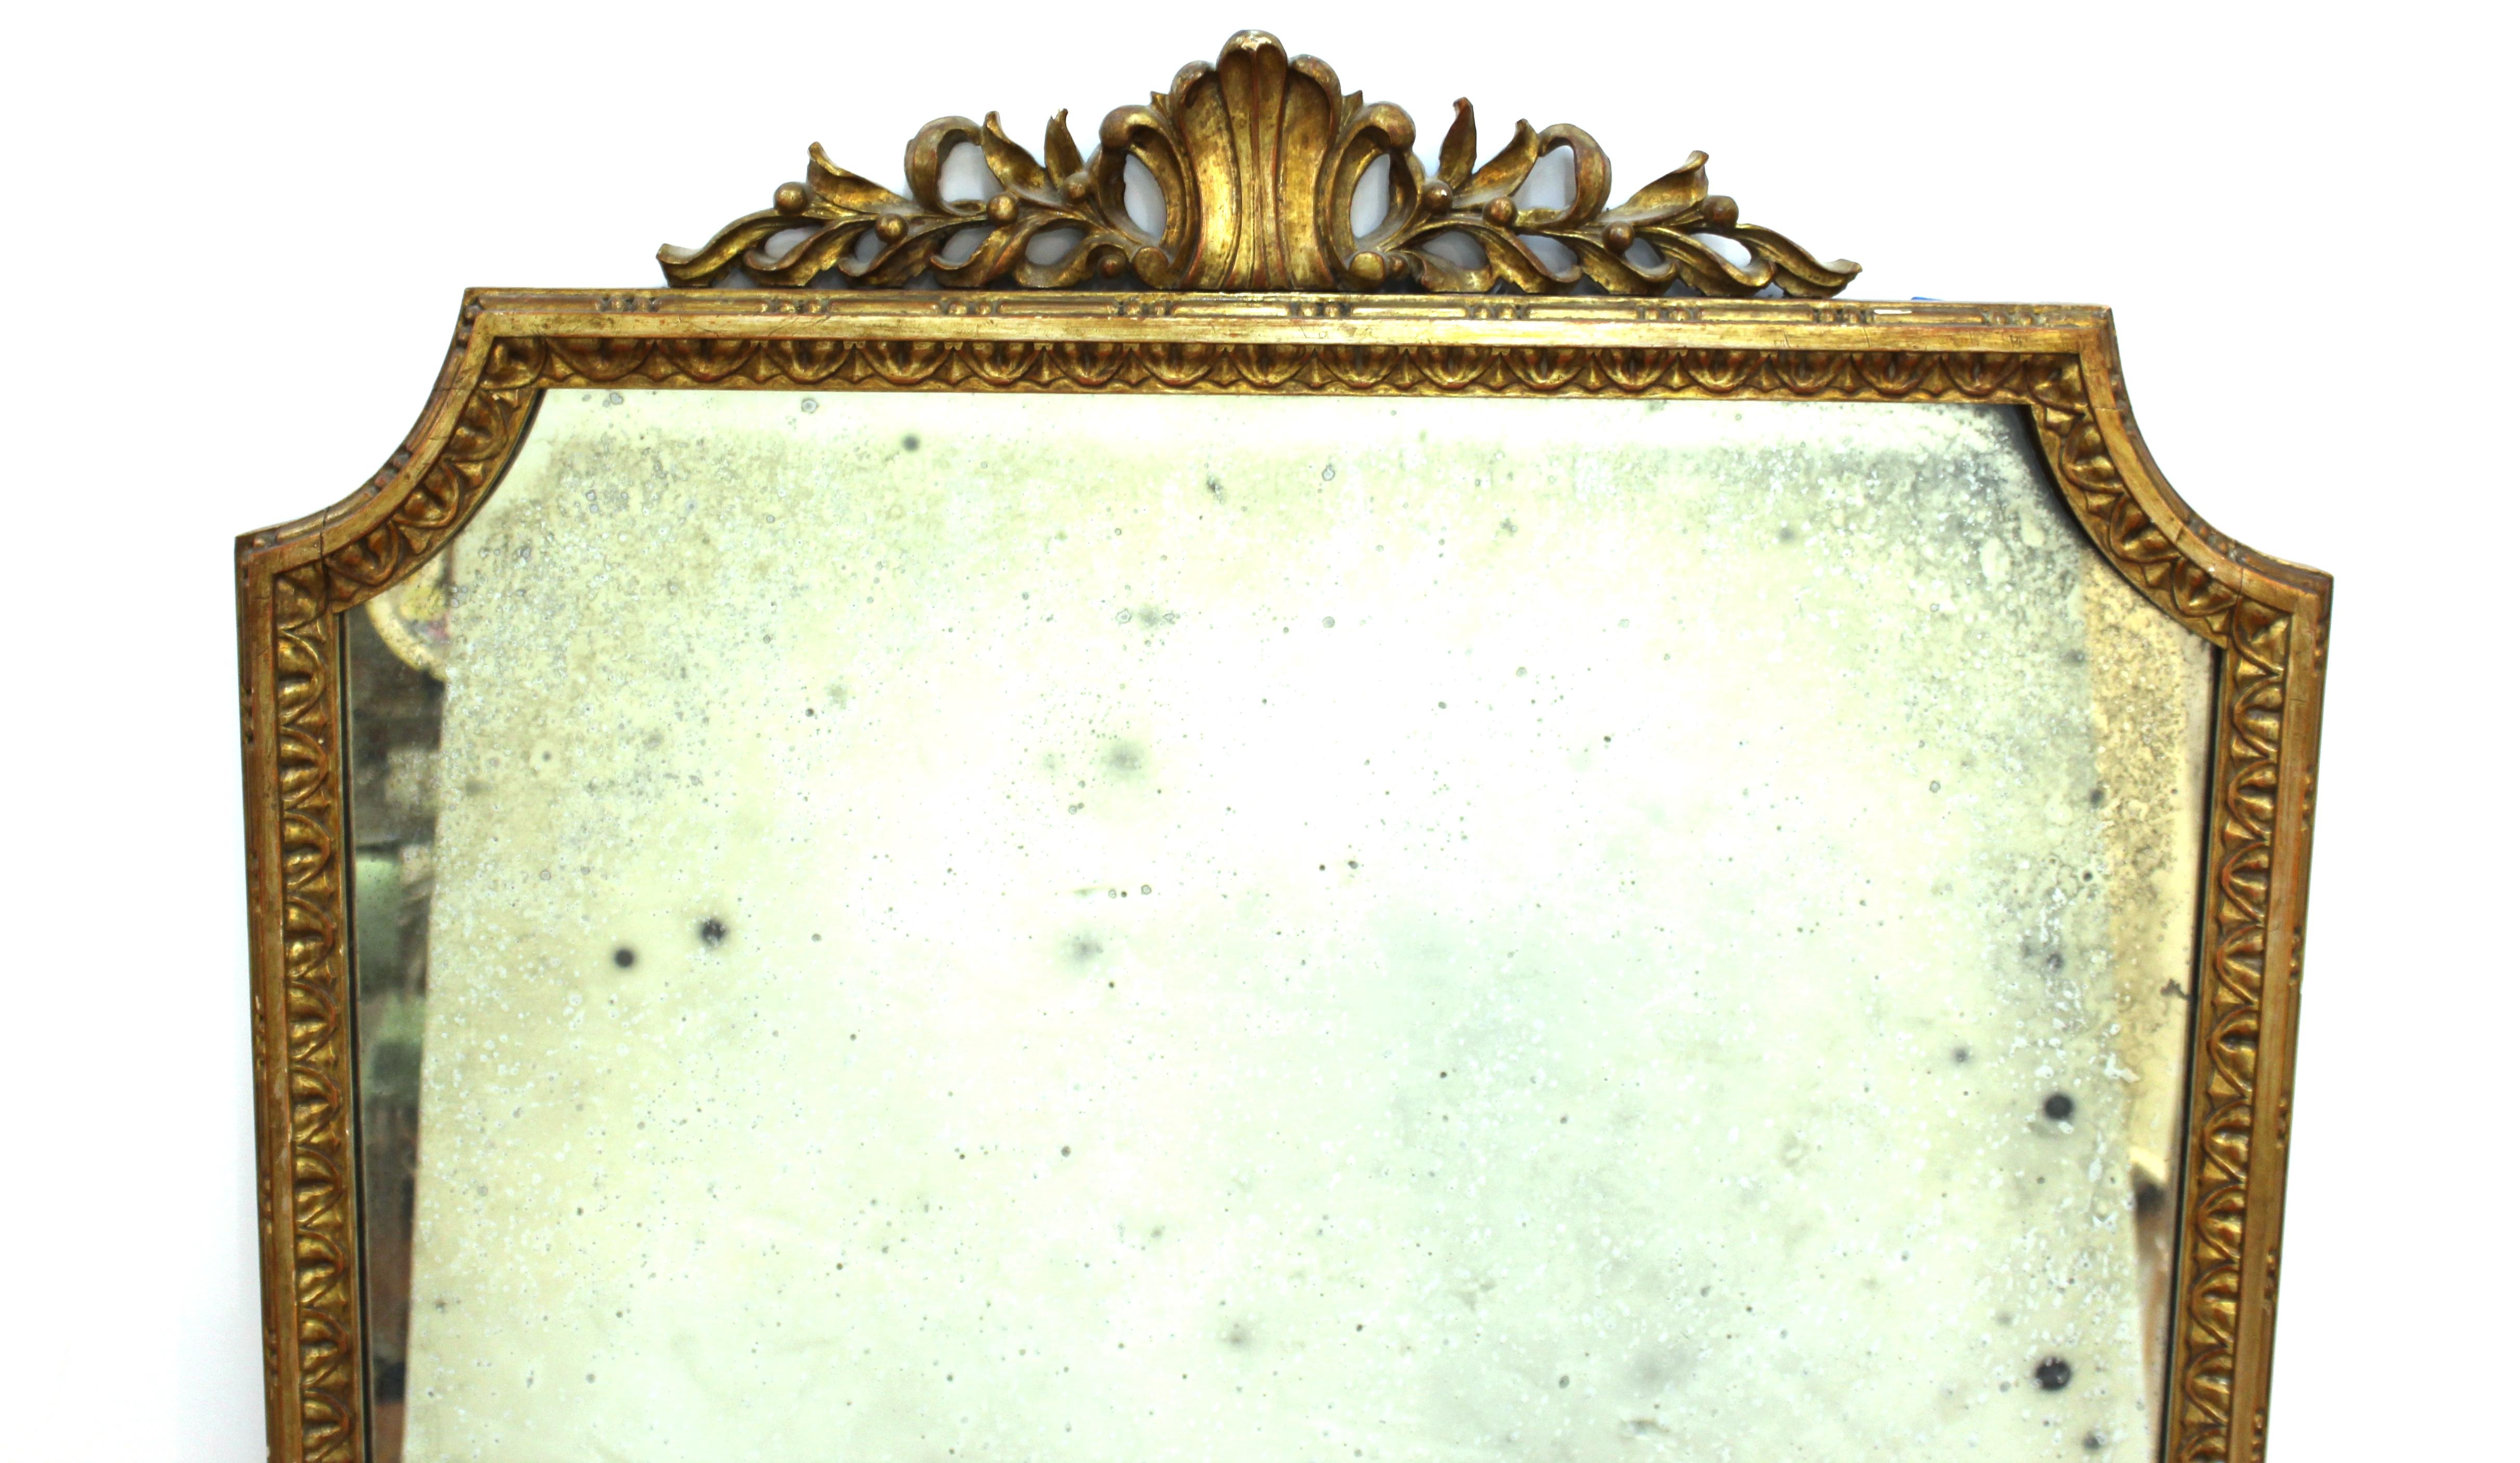 Neoclassical style wall mirror with carved giltwood frame and aged mirror glass. 

Dealer: S138XX